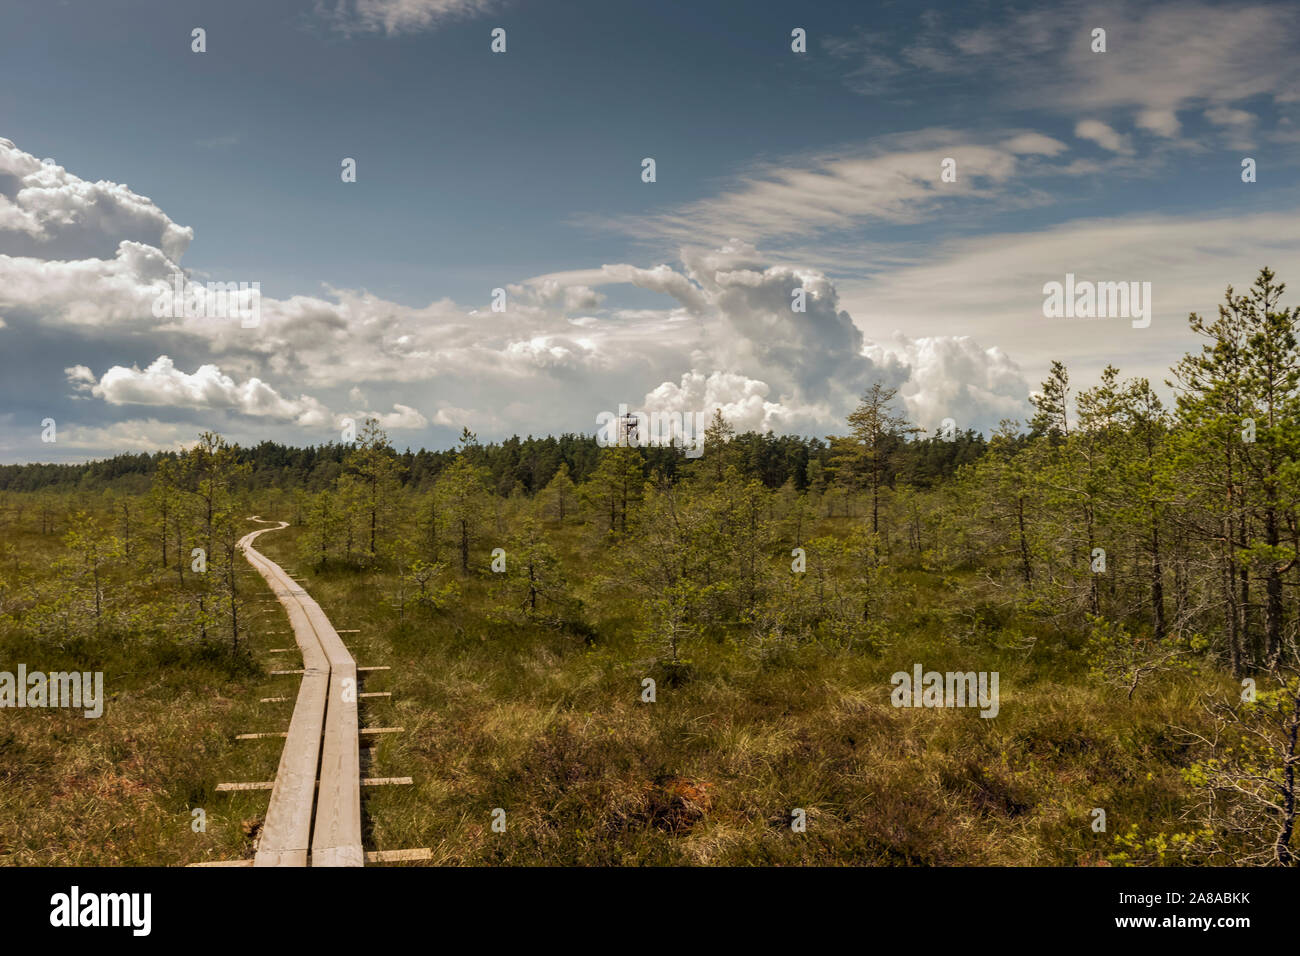 Wooden boardwalk through beautiful forest and swamp. Estonia Stock Photo